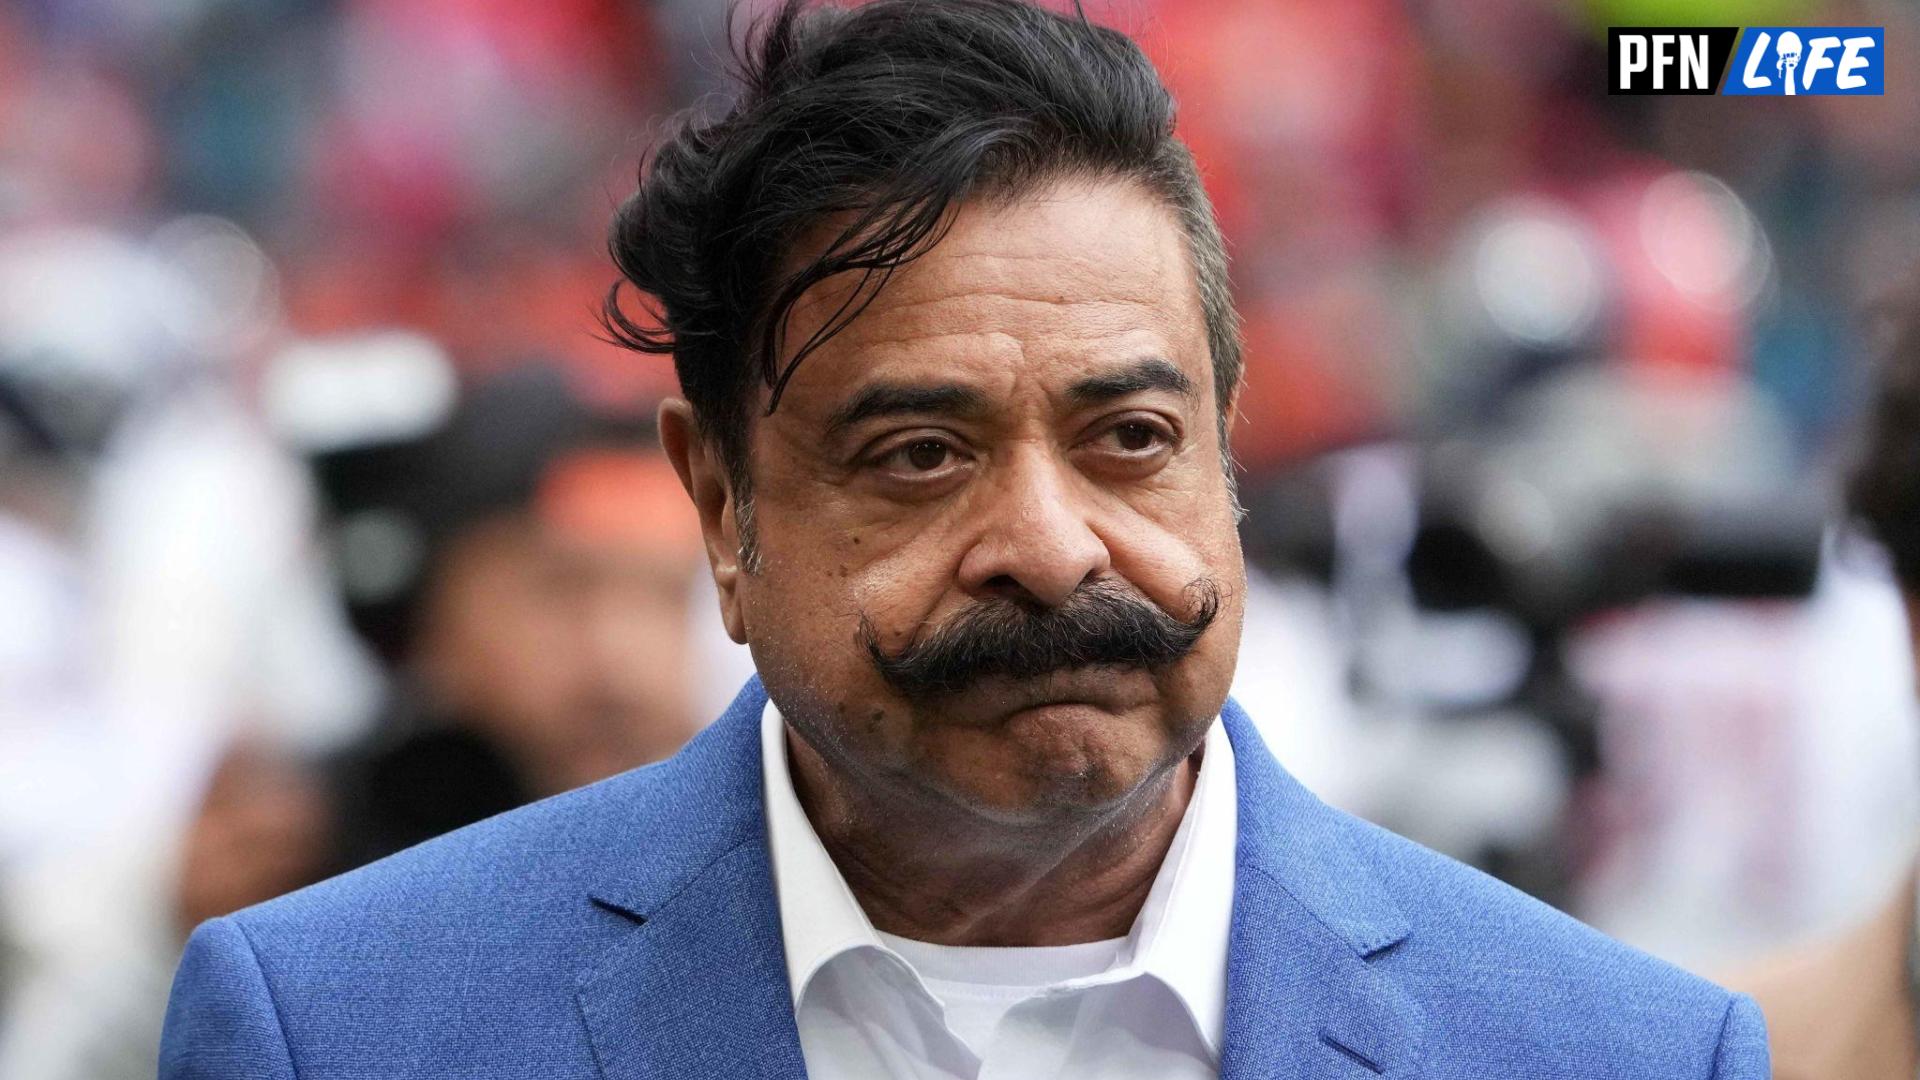 Jacksonville Jaguars owner Shad Khan aka Shahid Khan reacts during an NFL International Series game against the Denver Broncos at Wembley Stadium. The Broncos defeated the Jaguars 21-17.